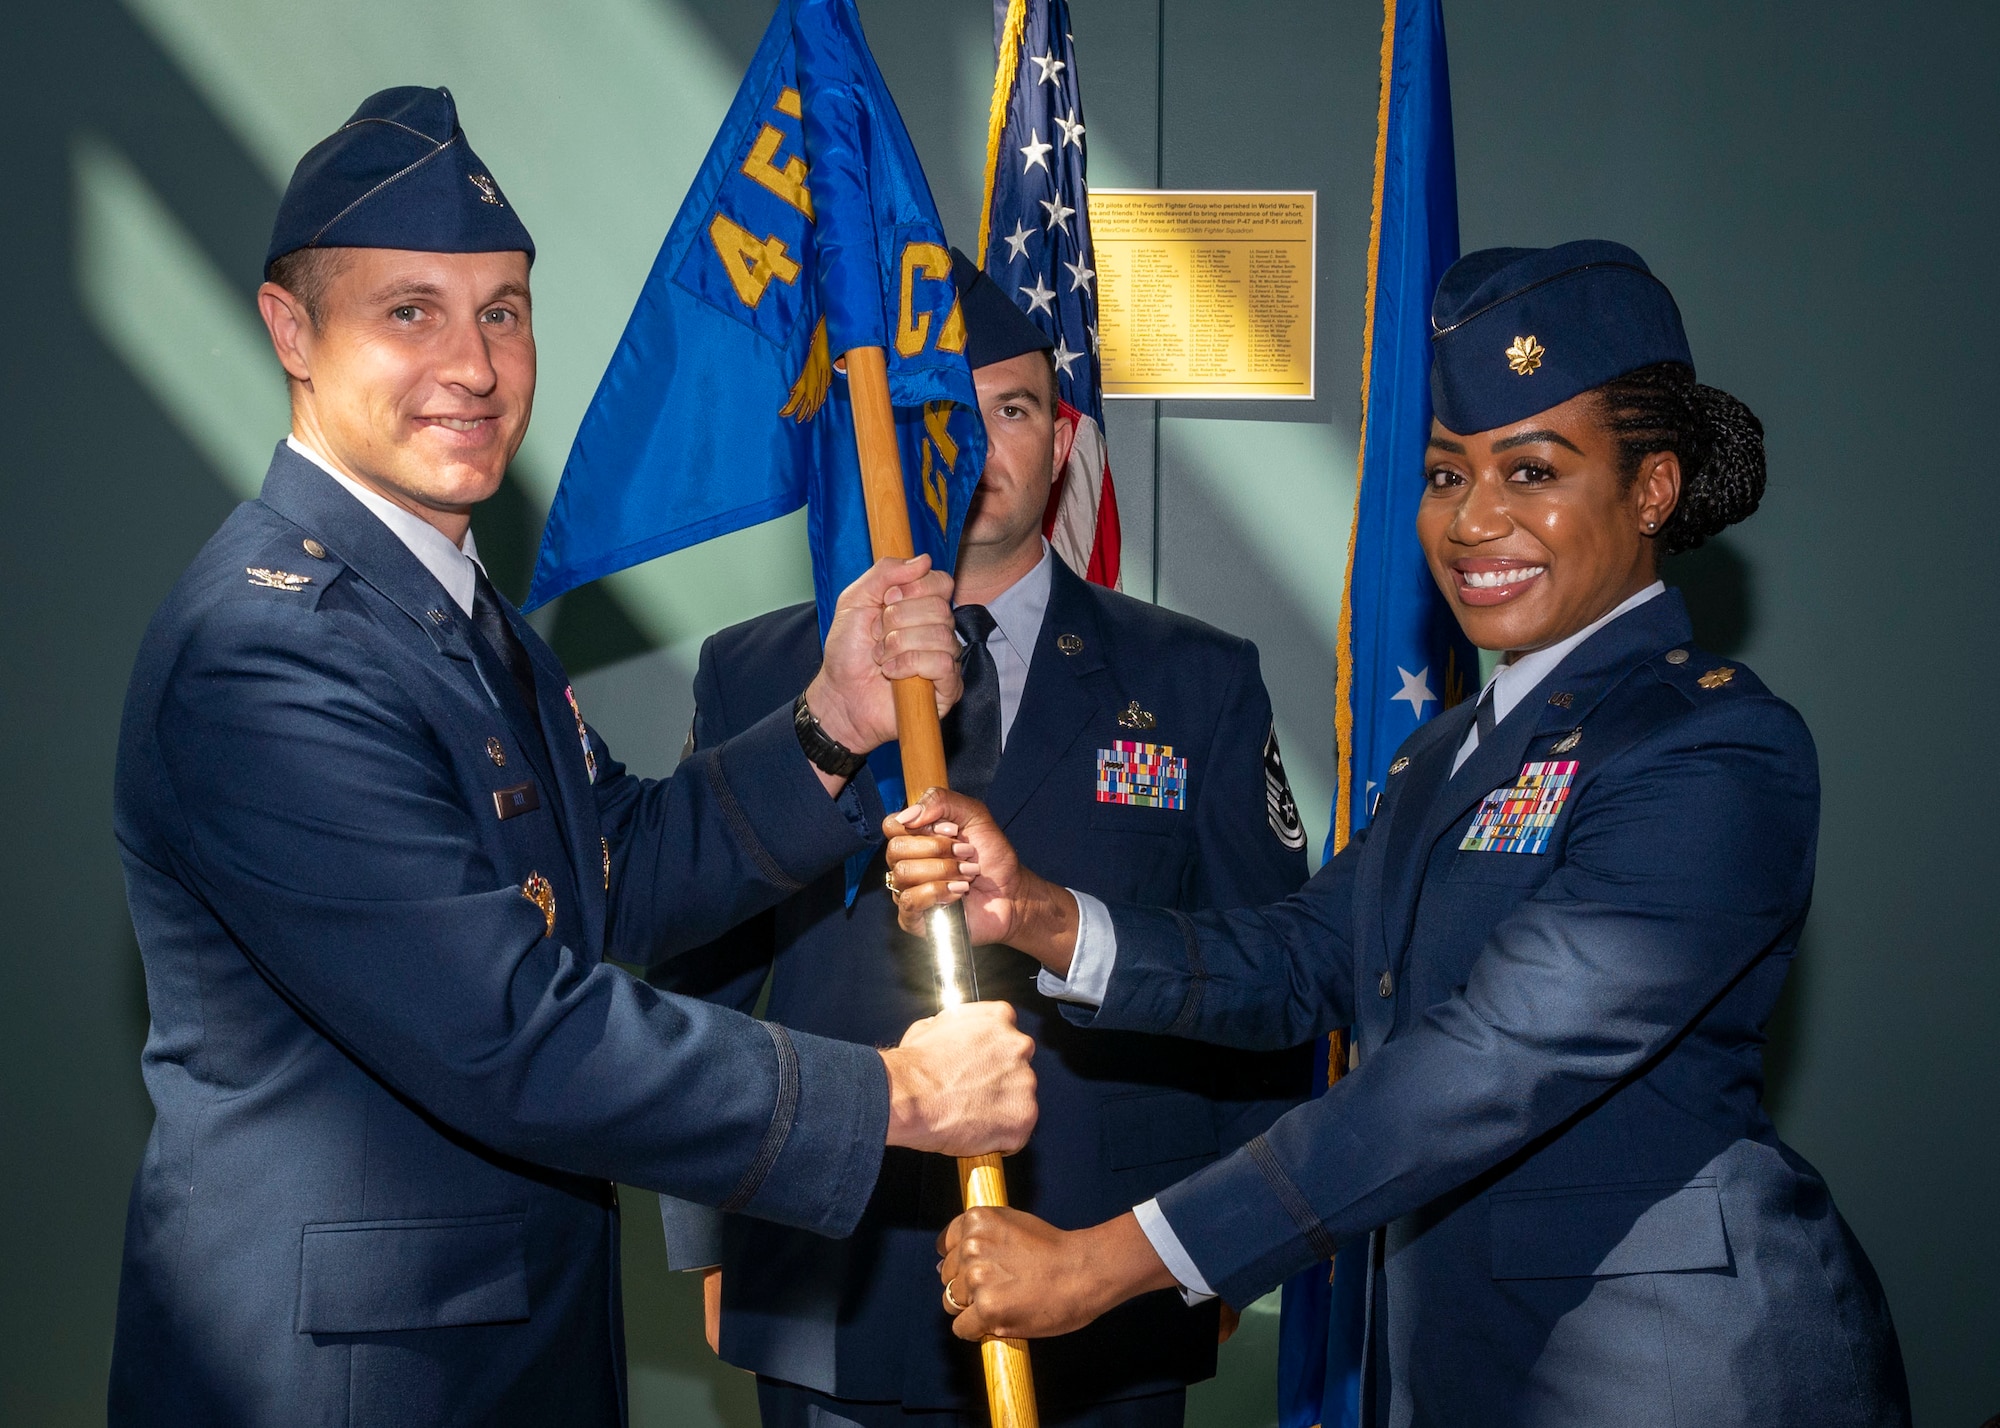 Maj. Aleksi Vega, right, incoming 4th Comptroller Squadron commander, receives the guidon from Col. Lucas Teel, 4th Fighter Wing commander, during the 4th CPTS change of command ceremony at Seymour Johnson Air Force Base, North Carolina, June 24, 2022.